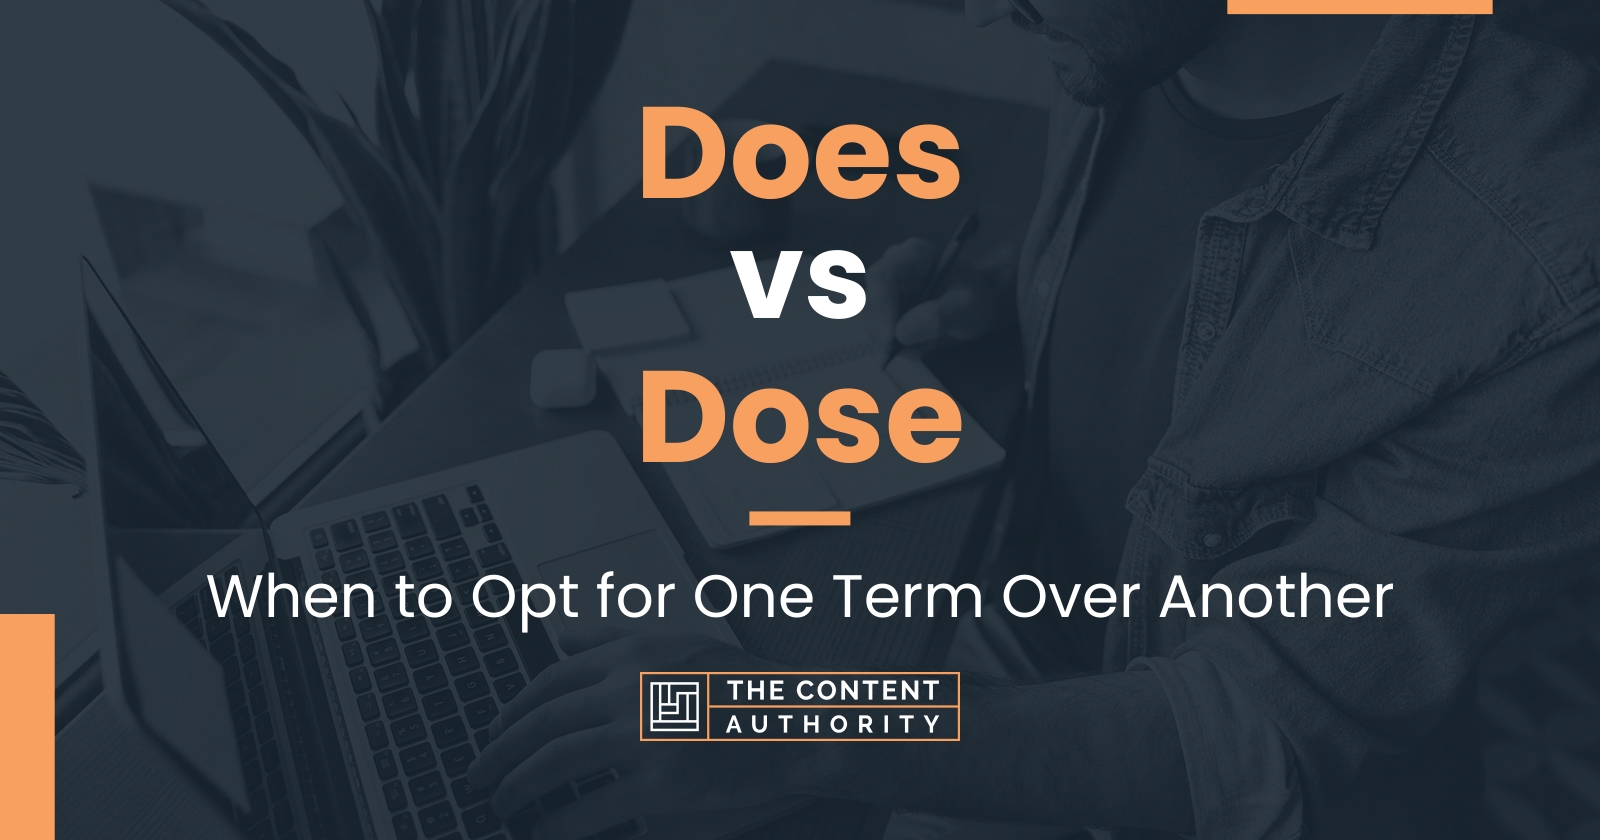 Does vs Dose: When to Opt for One Term Over Another